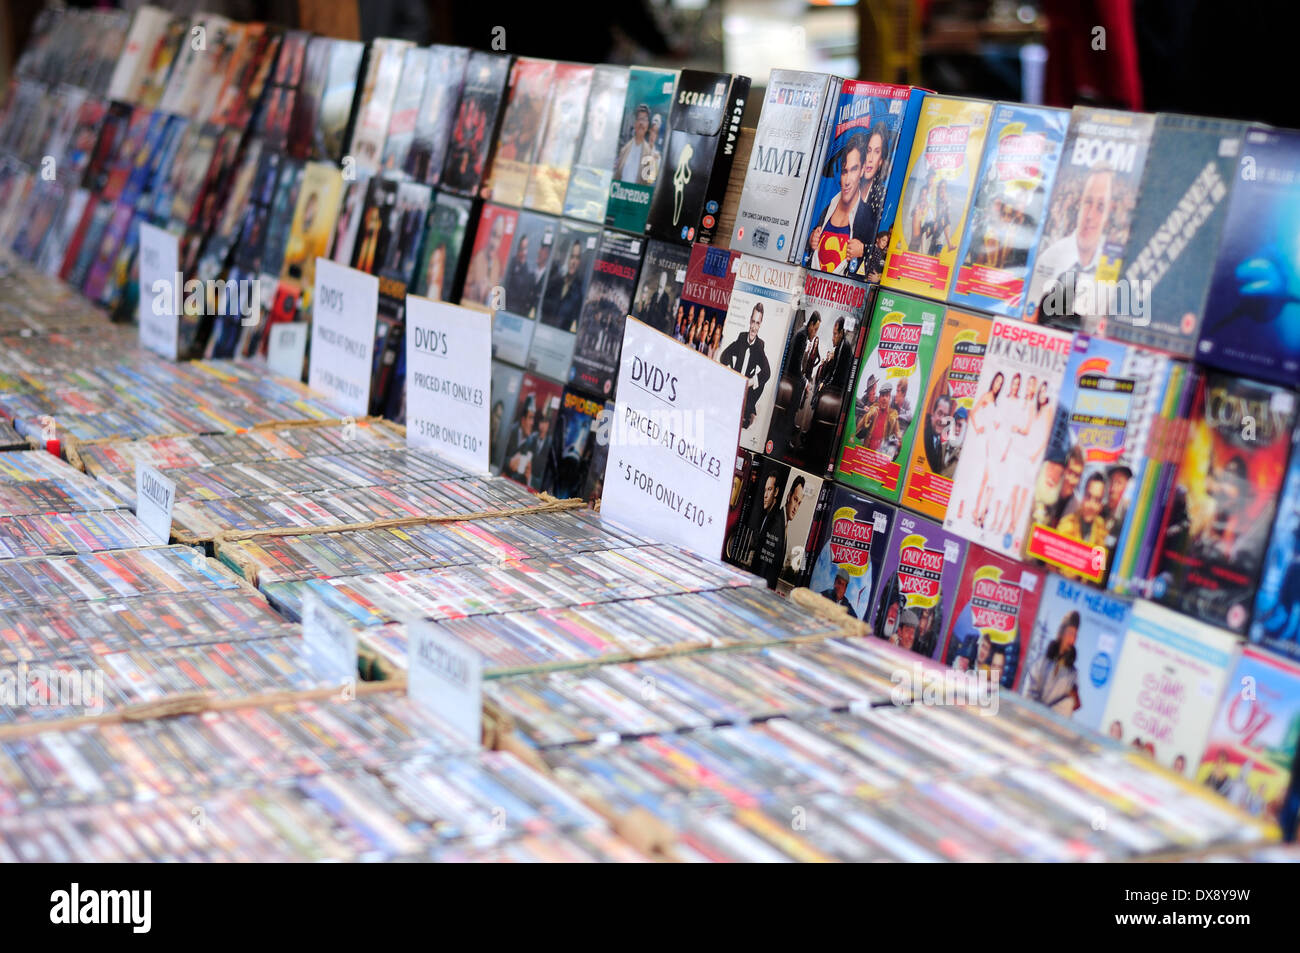 Chesterfield Flee Market And Fruit And Vegetables .Derbyshire,UK. CD Music Discs . Stock Photo